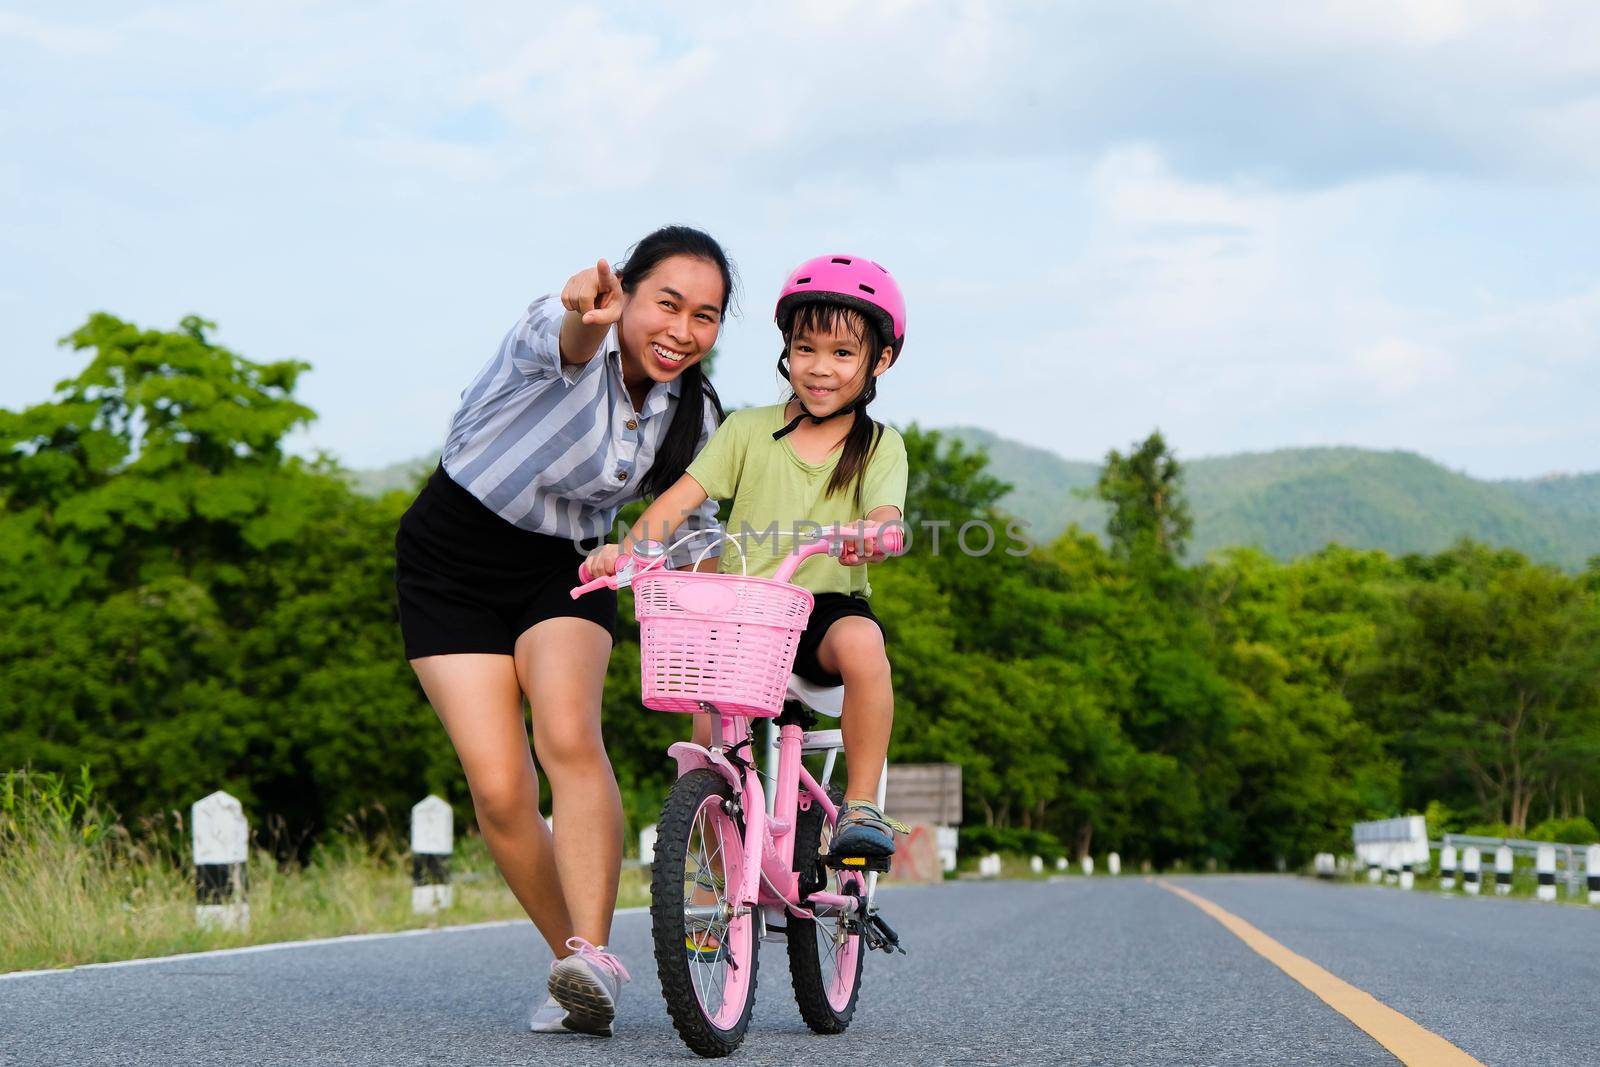 Asian mother teaching daughter to ride a bicycle in the park. A cute happy little girl learning to ride a bicycle with her mother. Active outdoor activities for kids. by TEERASAK